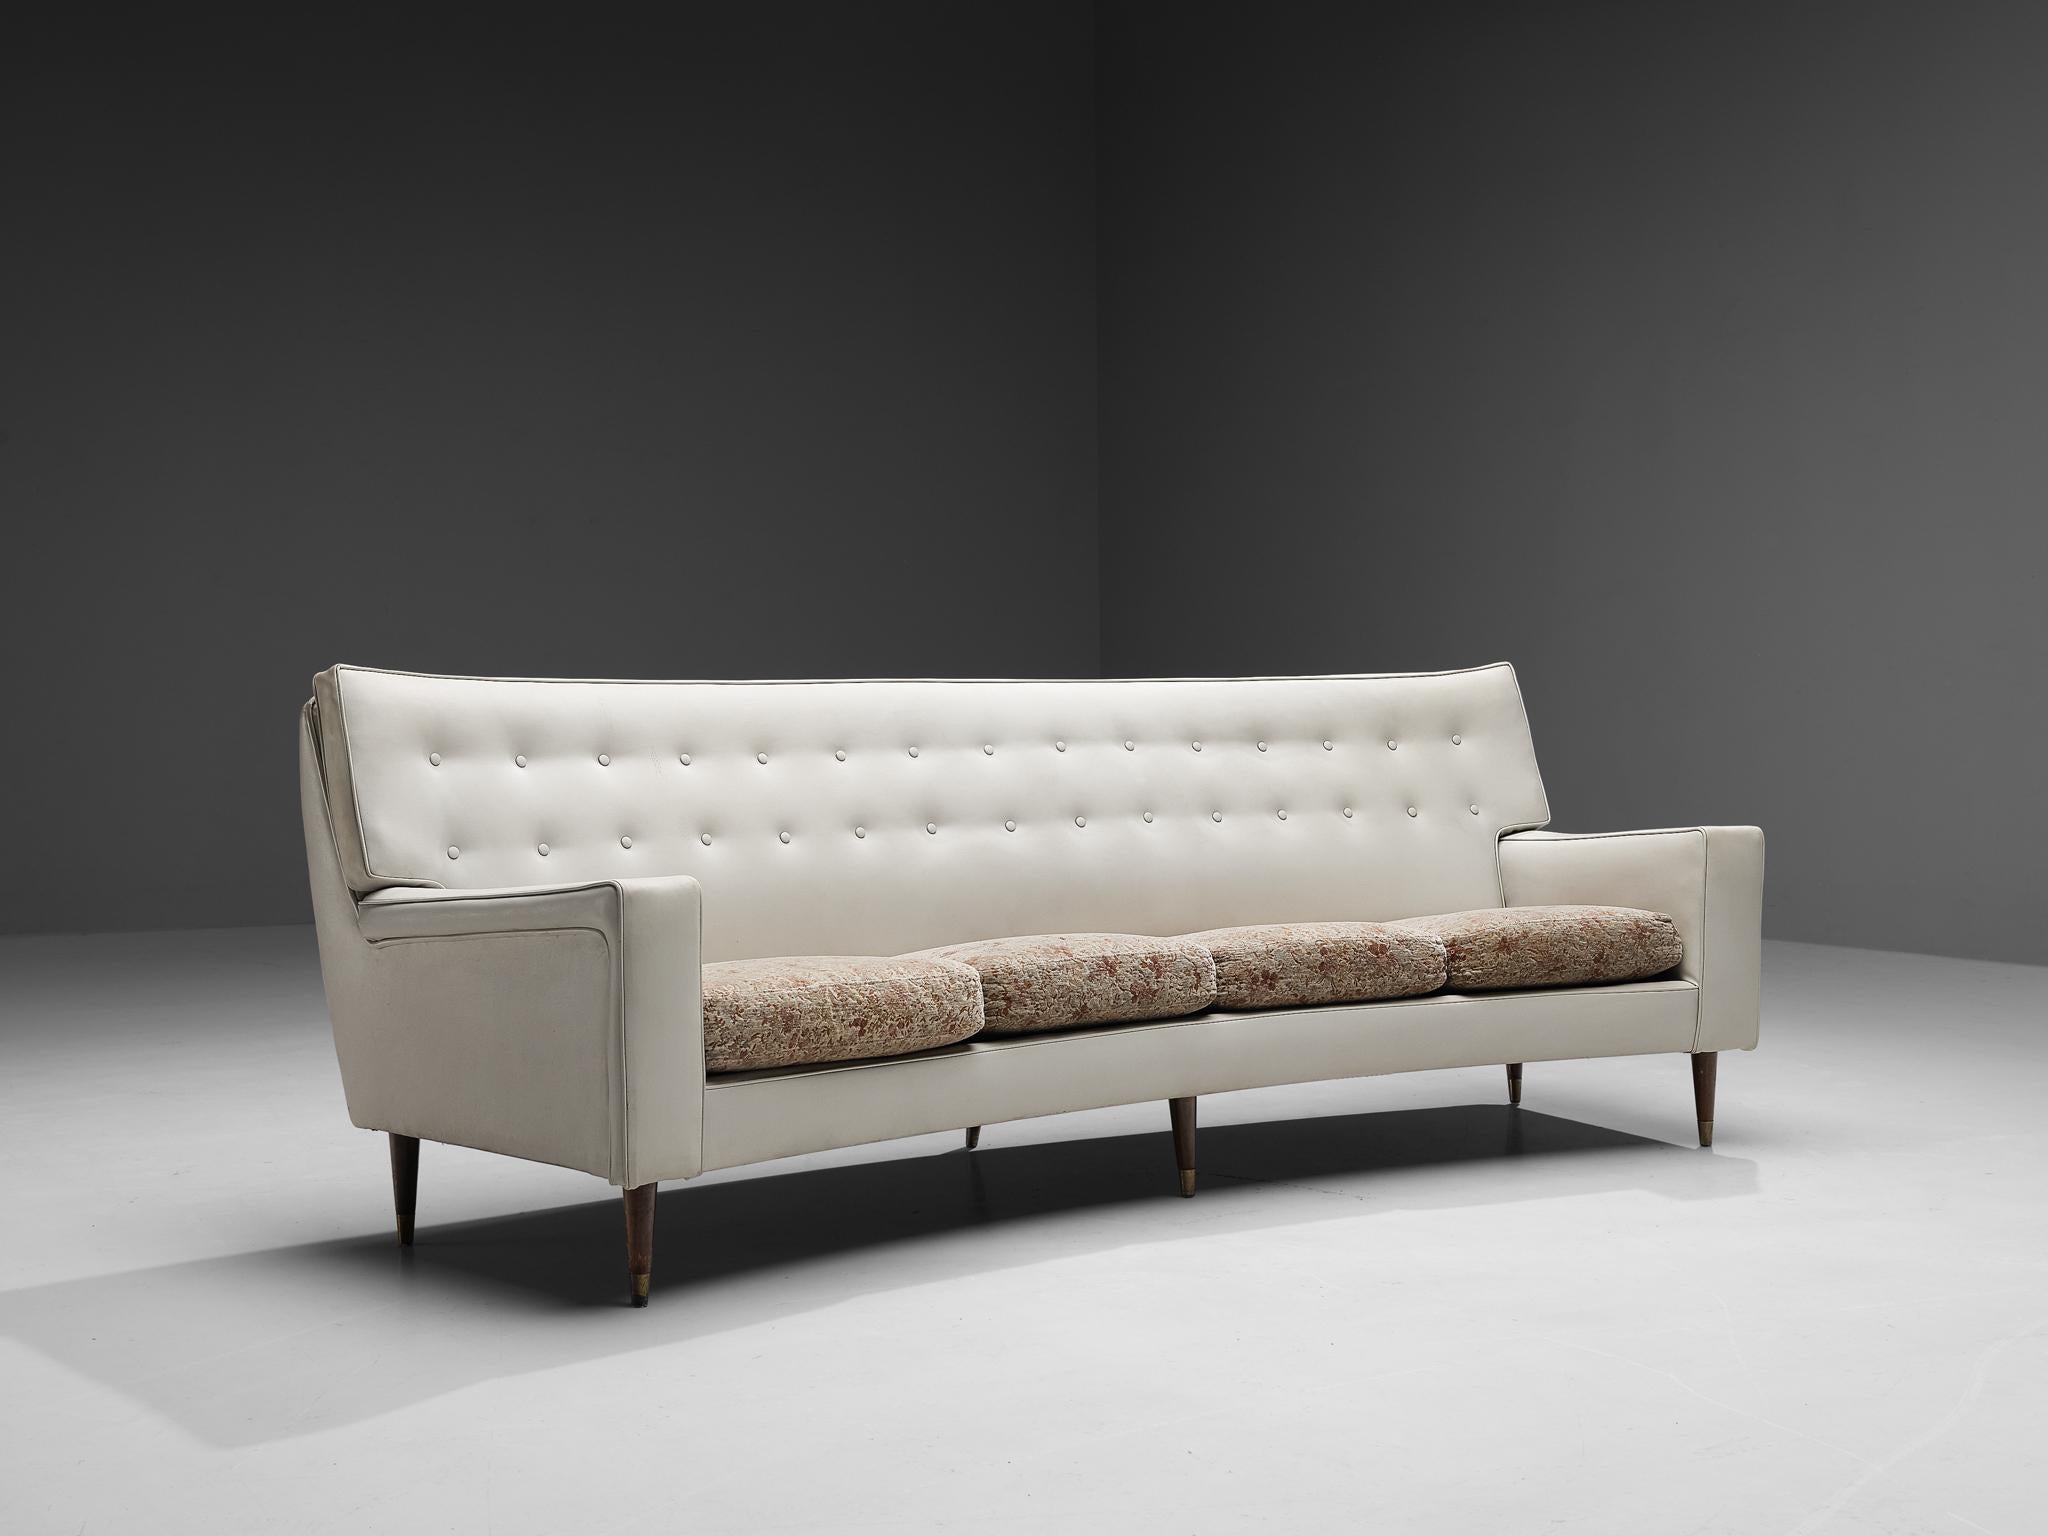 Sofa, leatherette, fabric, wood, brass, Italy, 1970s 

This charming looking sofa owes its elegancy to the curved shape of the body and high, imposed backrest. The seat is upholstered in white leatherette and shows beautiful buttons placed on two